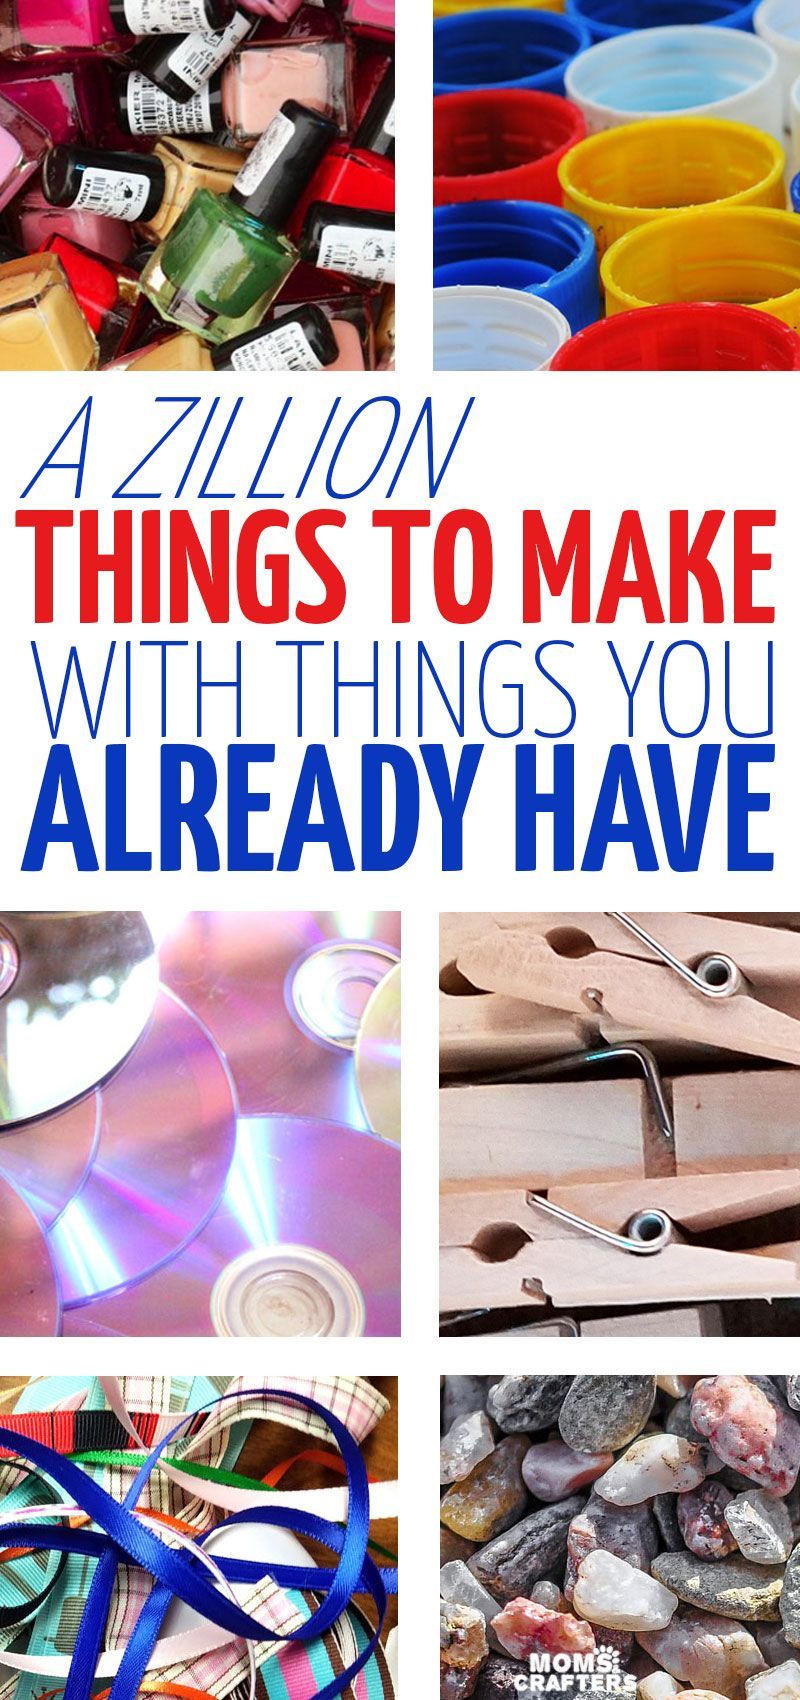 A Zillion things to make -   diy To Do When Bored crafts